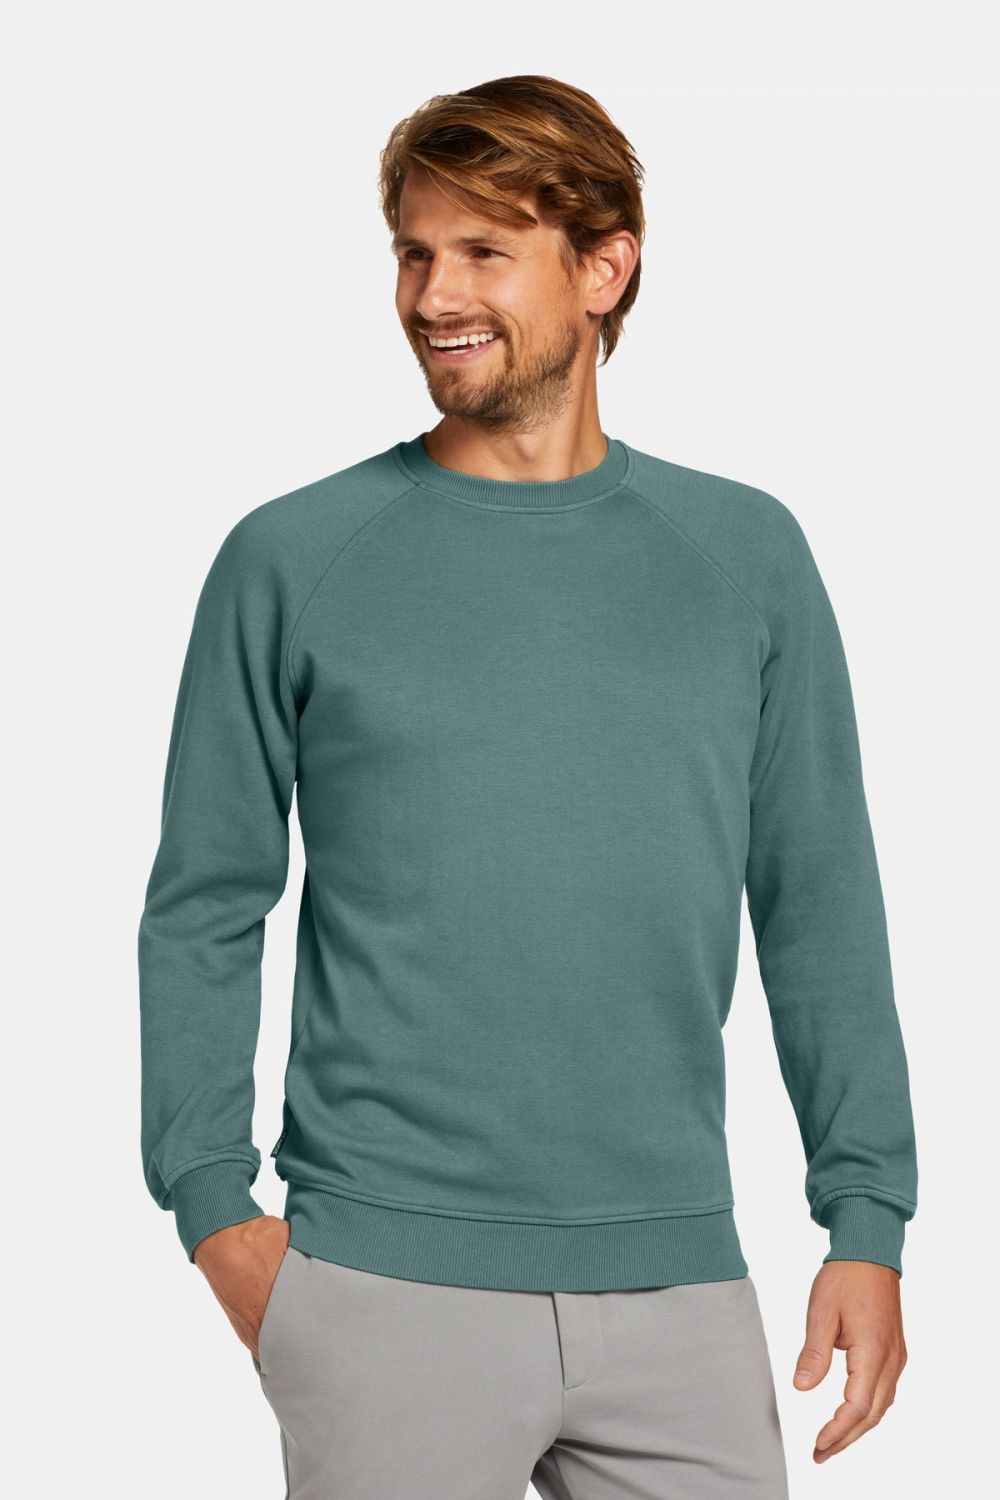 Felsons * The Easy Sweater